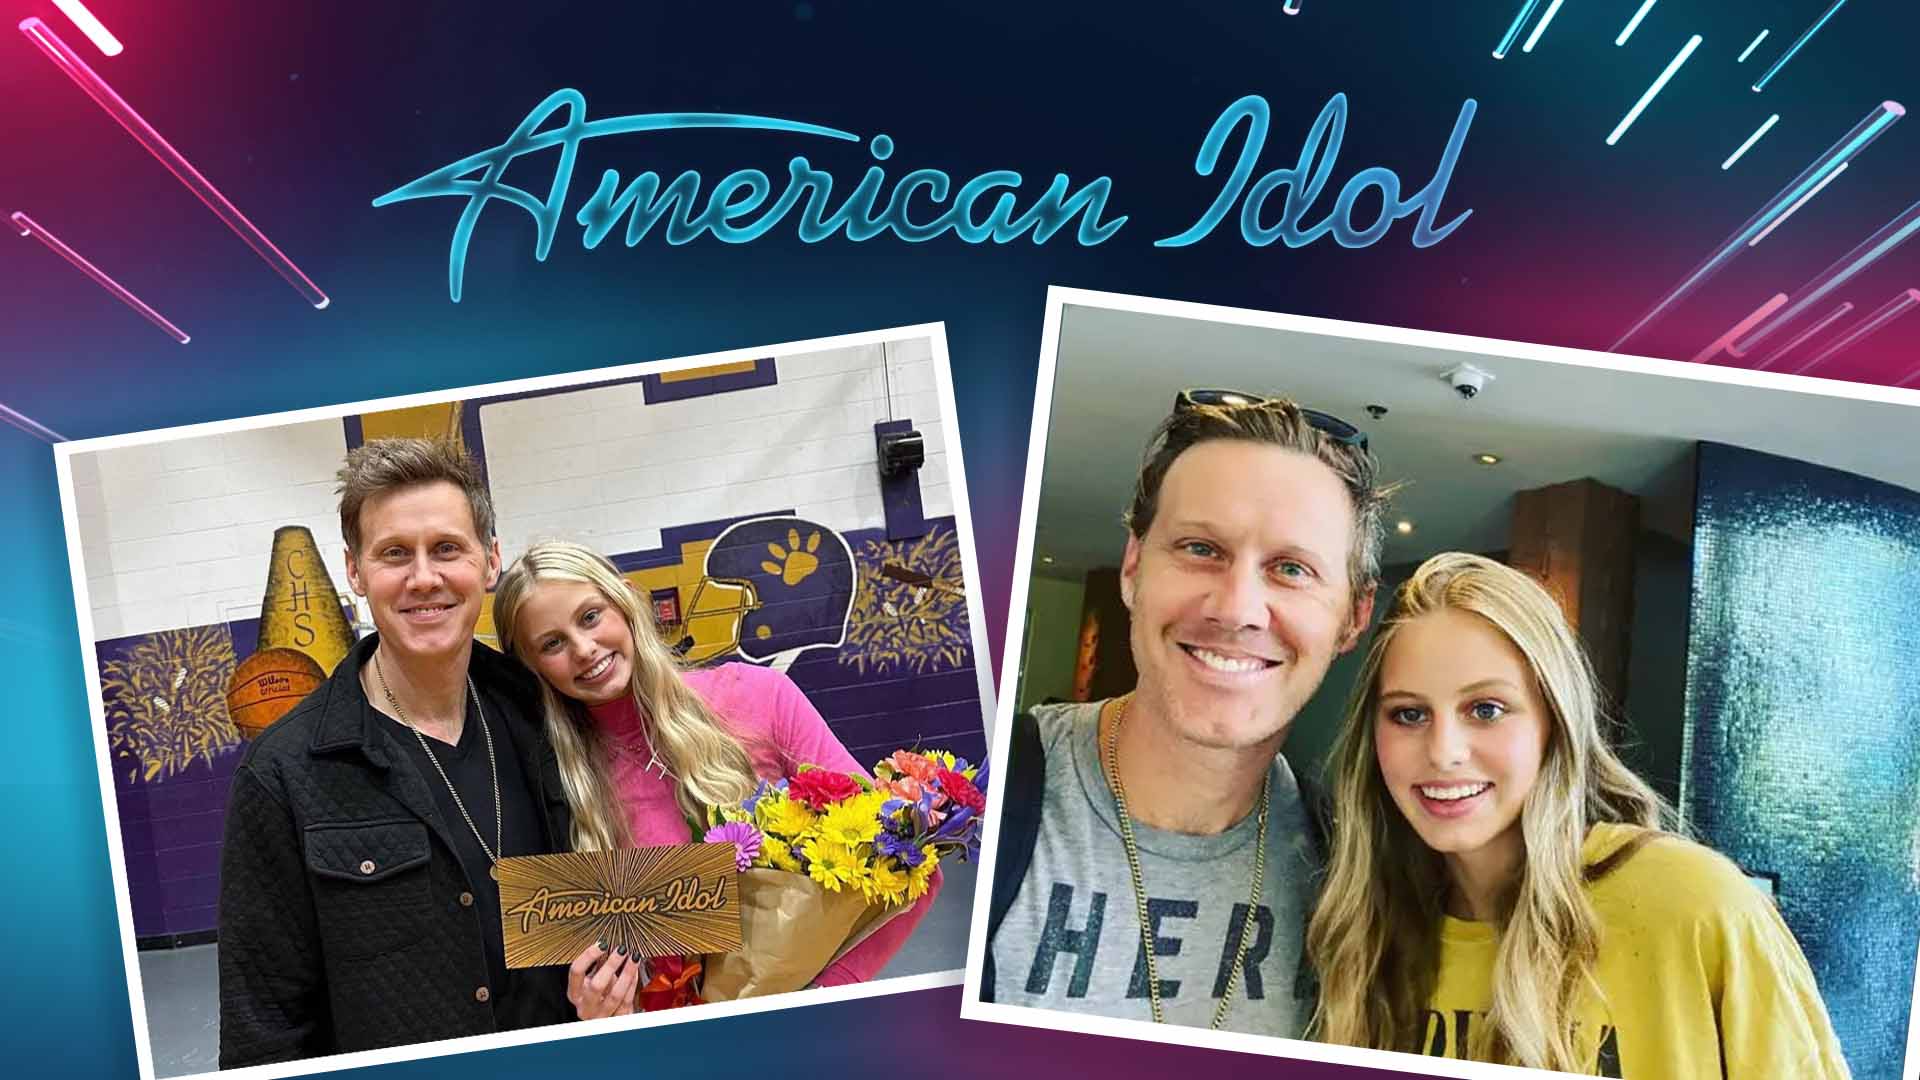 Jason Roy "Fangirls" Over American Idol's Haven Madison for Good Reason